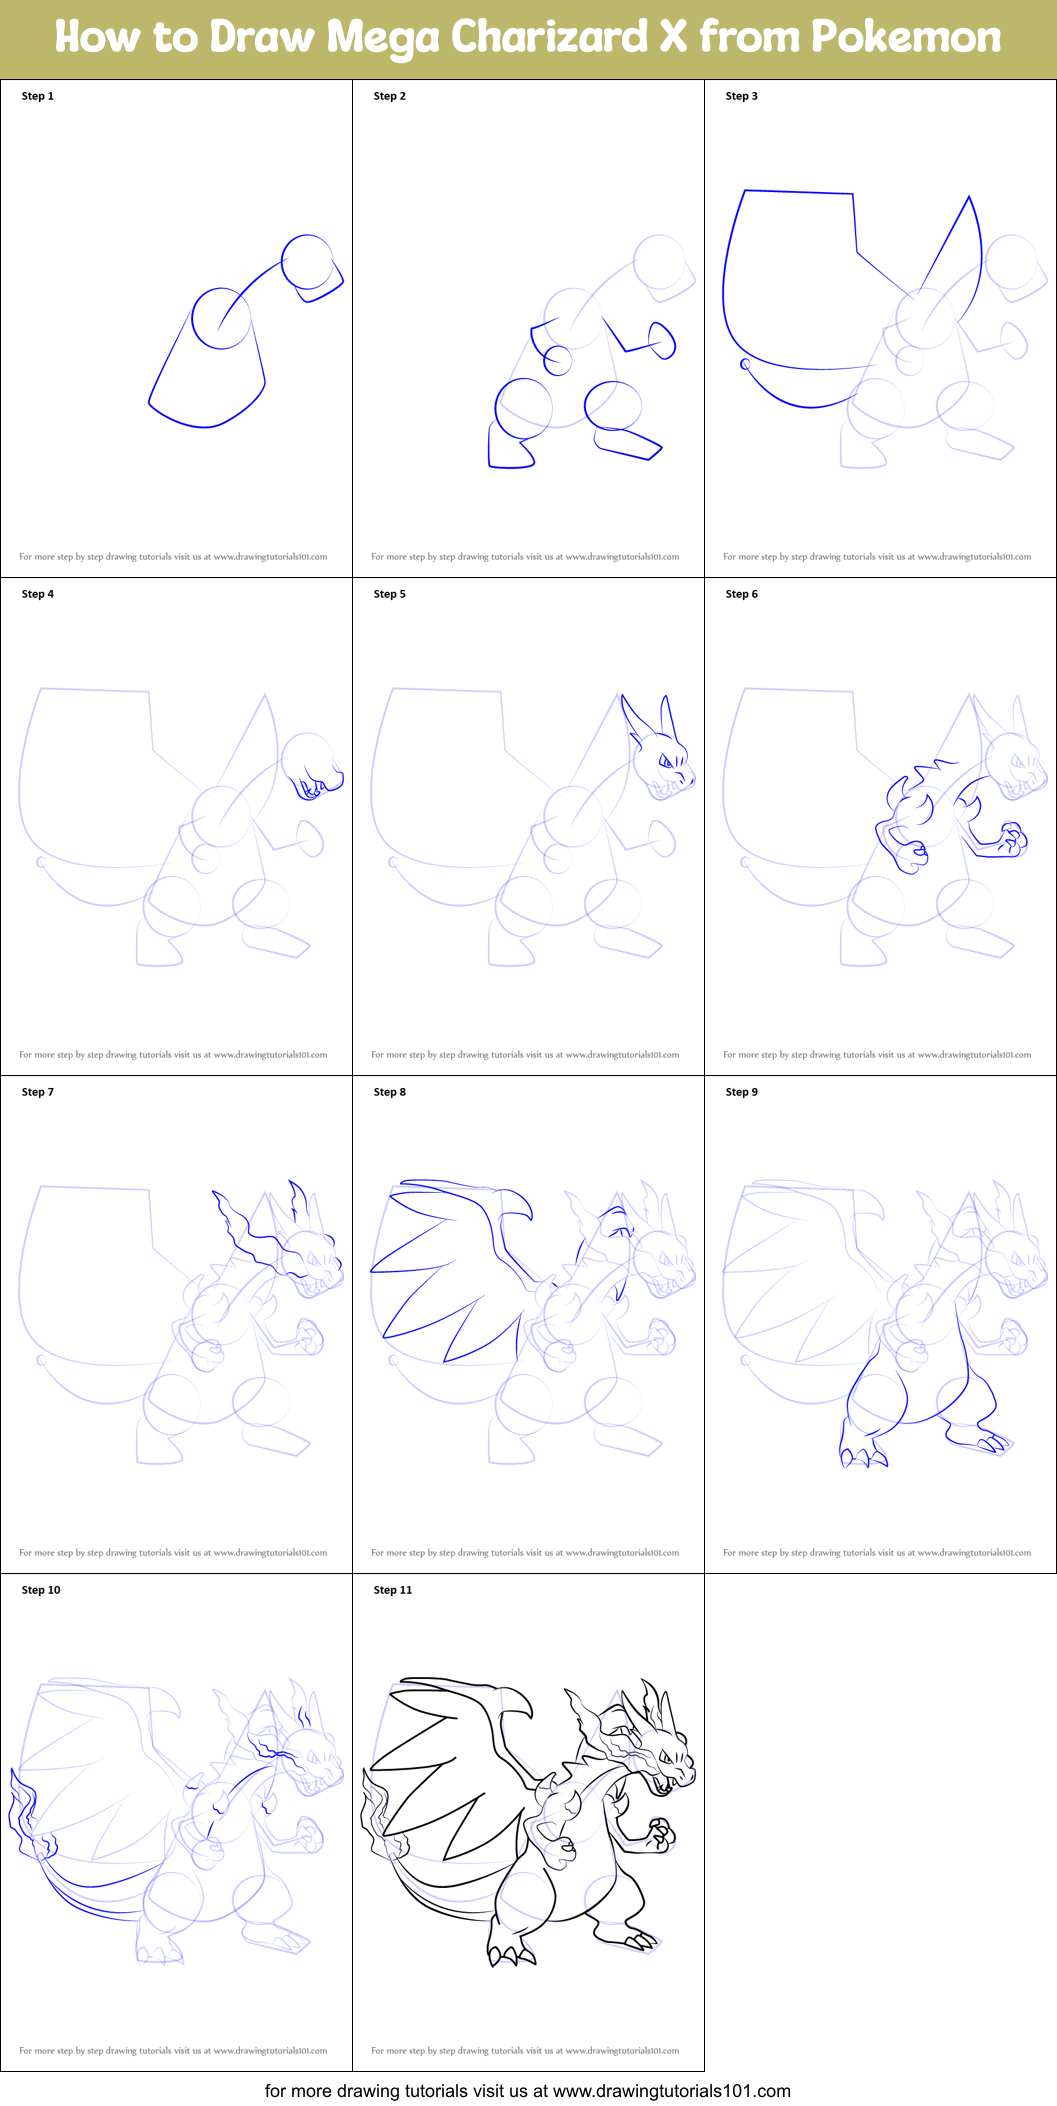 How to Draw Mega Charizard X from Pokemon printable step by step